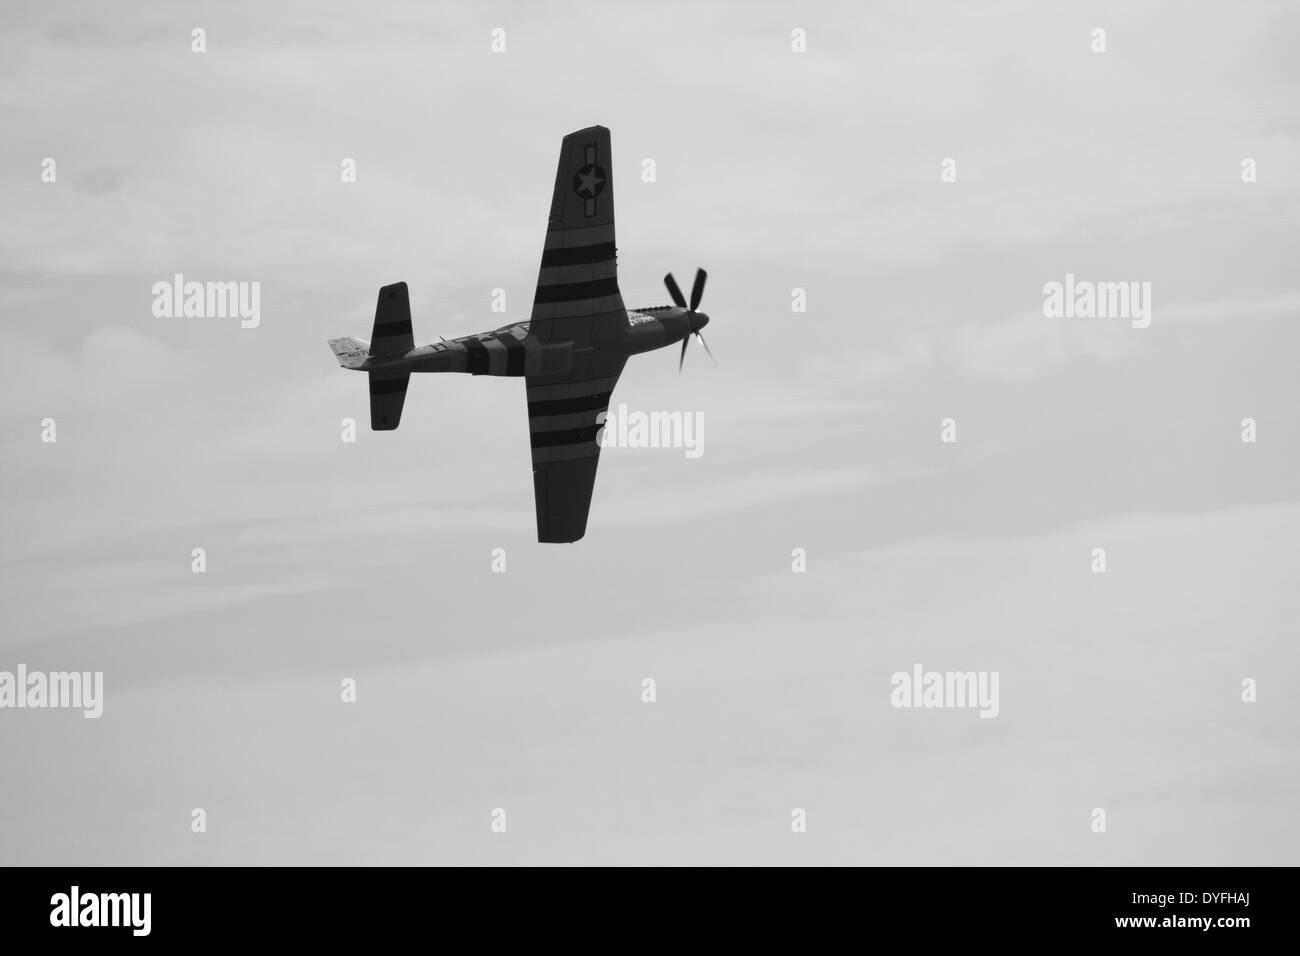 P-51 Mustang flying at Clacton Air show, August 2013 Stock Photo